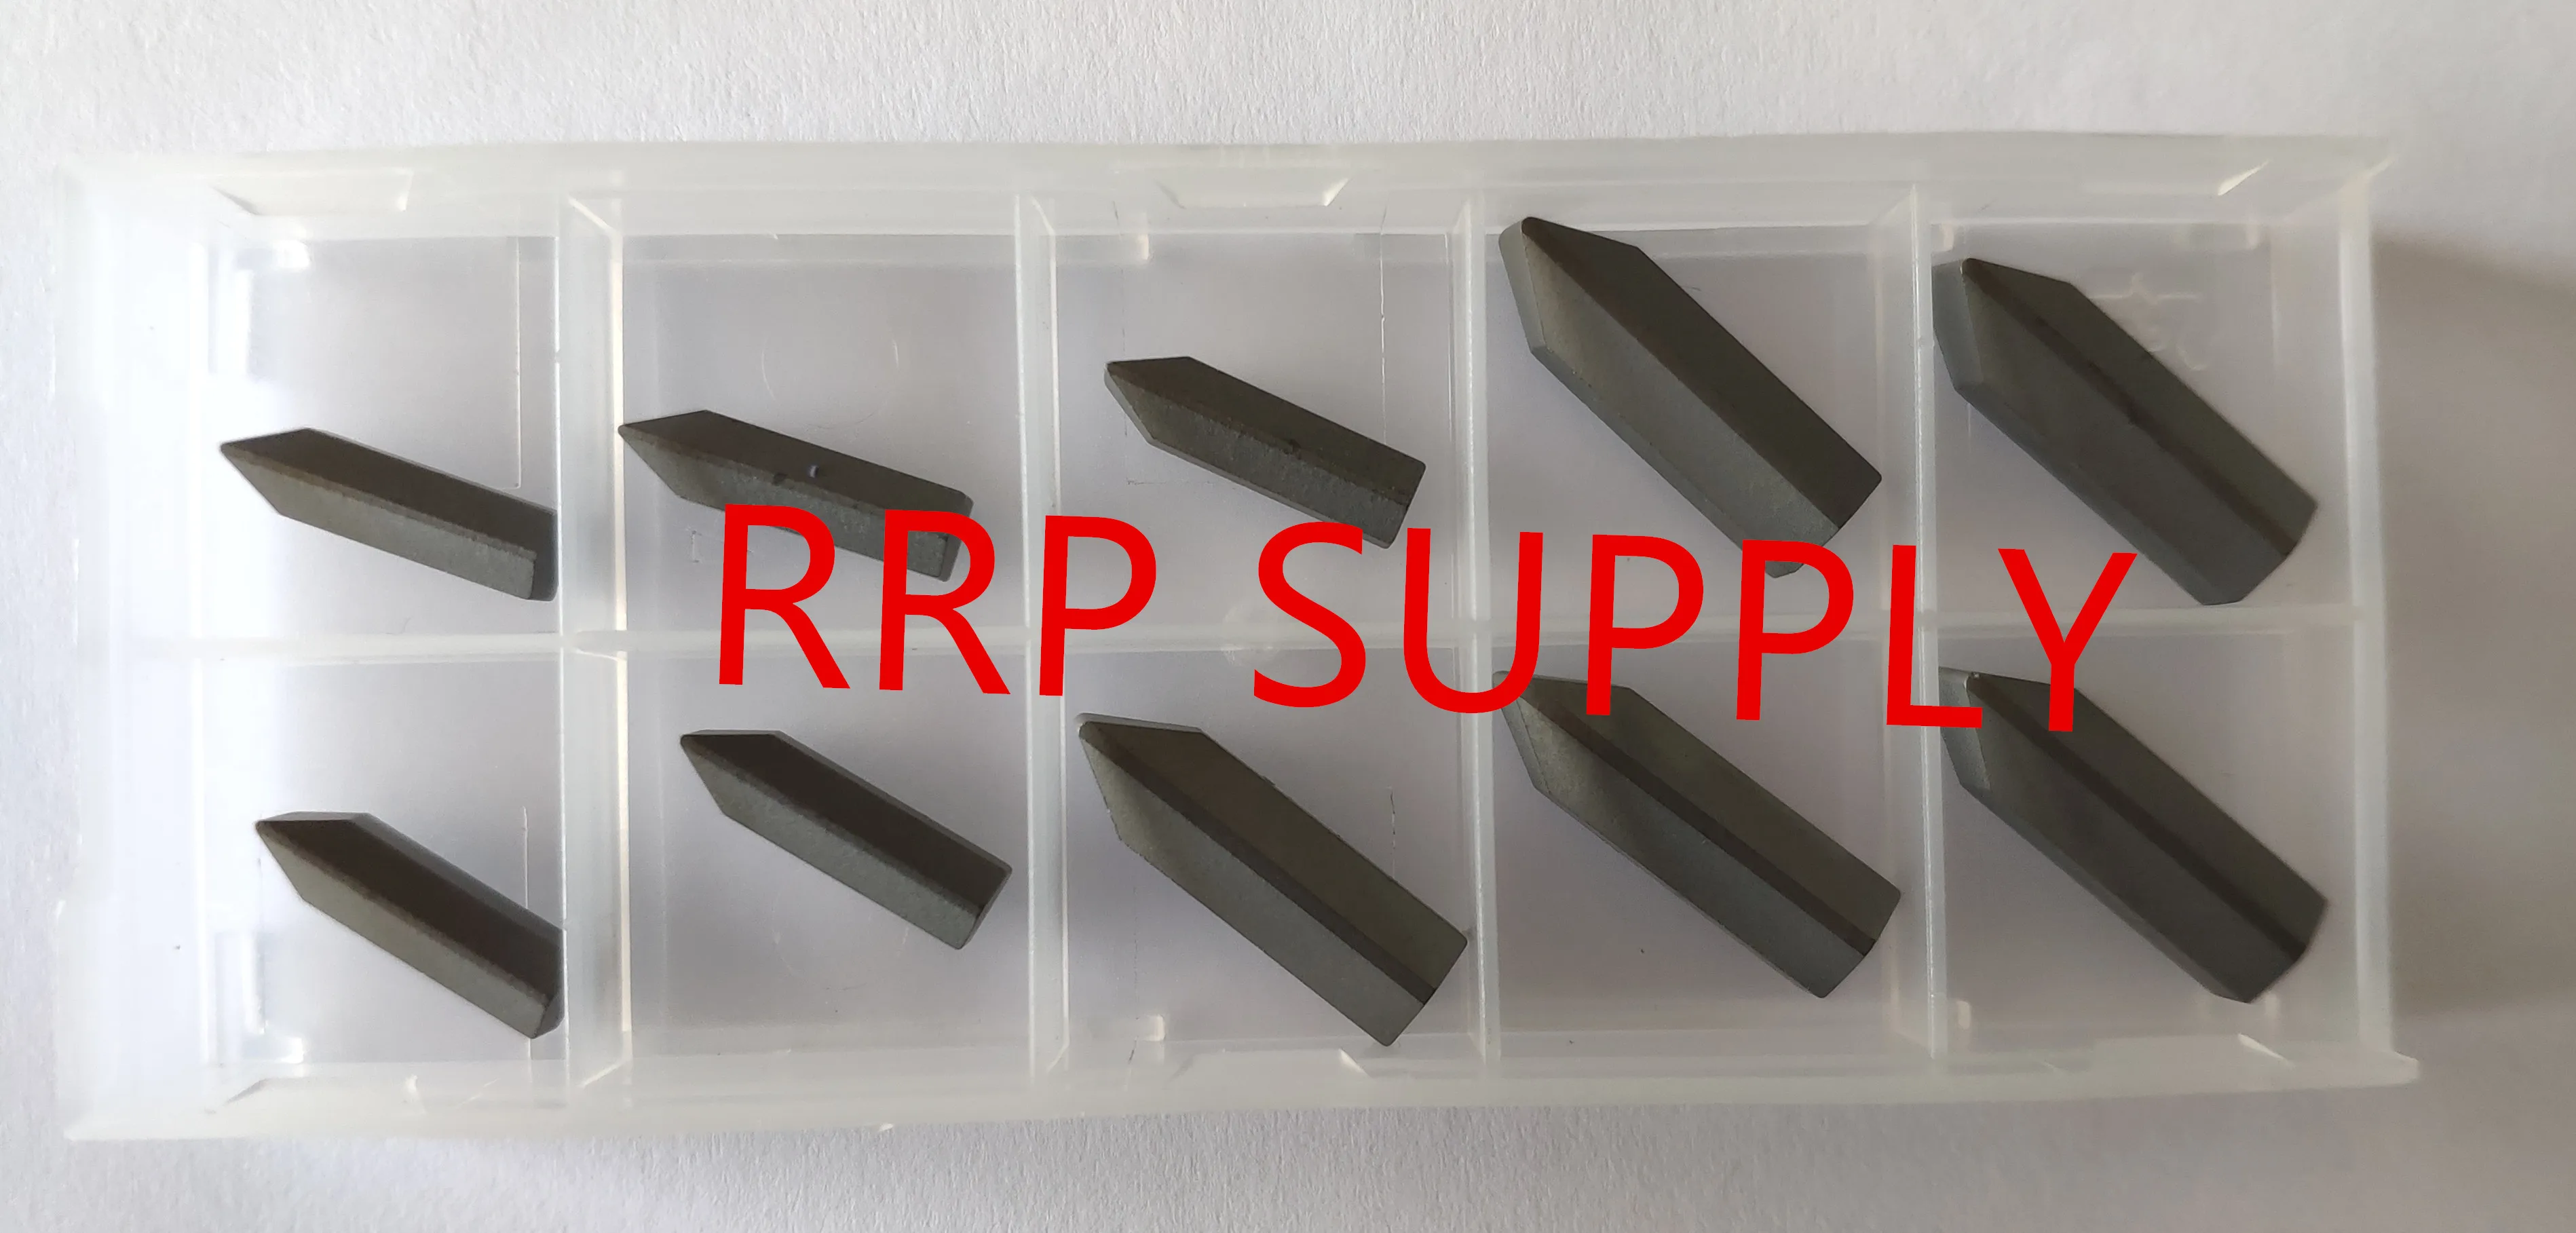 use for Cut-Off Tools YT15 Material one Box Contains 10pcs FINCOS 10pcs JCL15-120 Carbide Inserts 